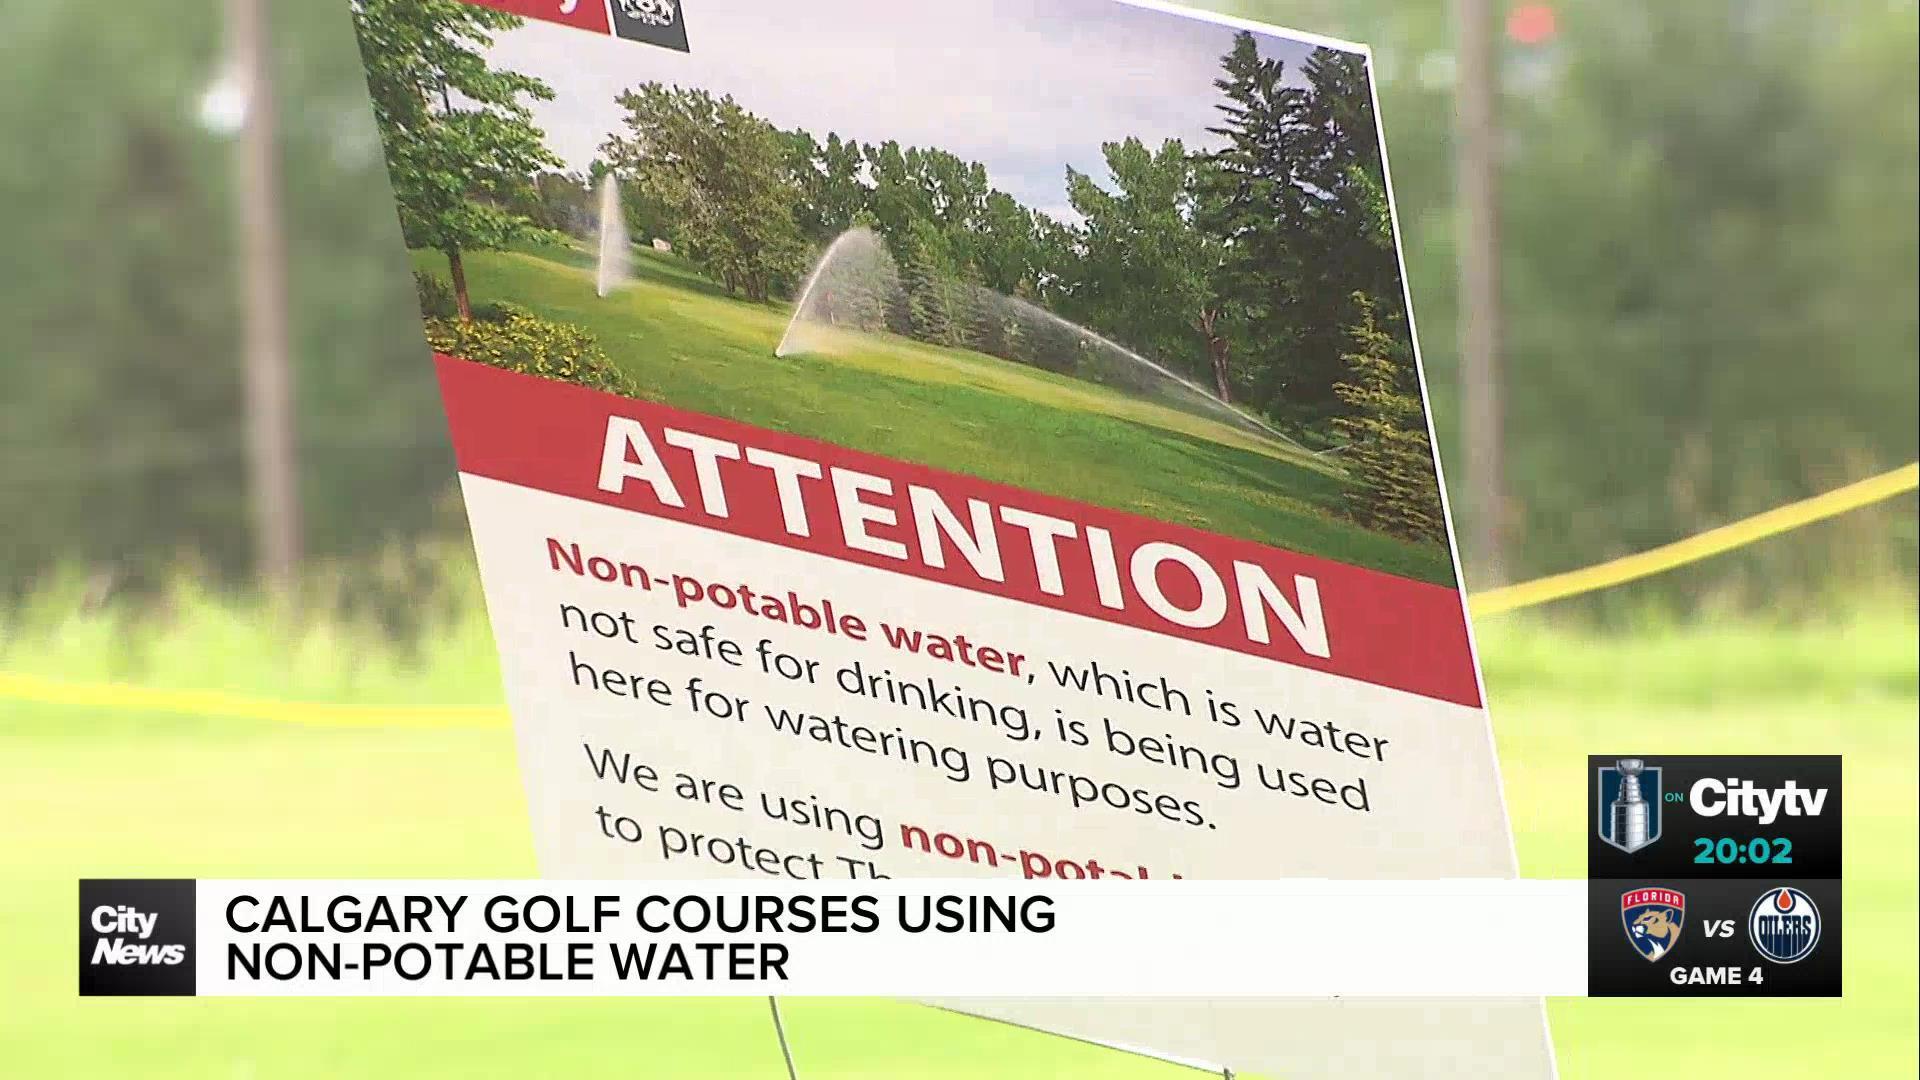 Some Calgary golf courses using non-potable water to promote conservation